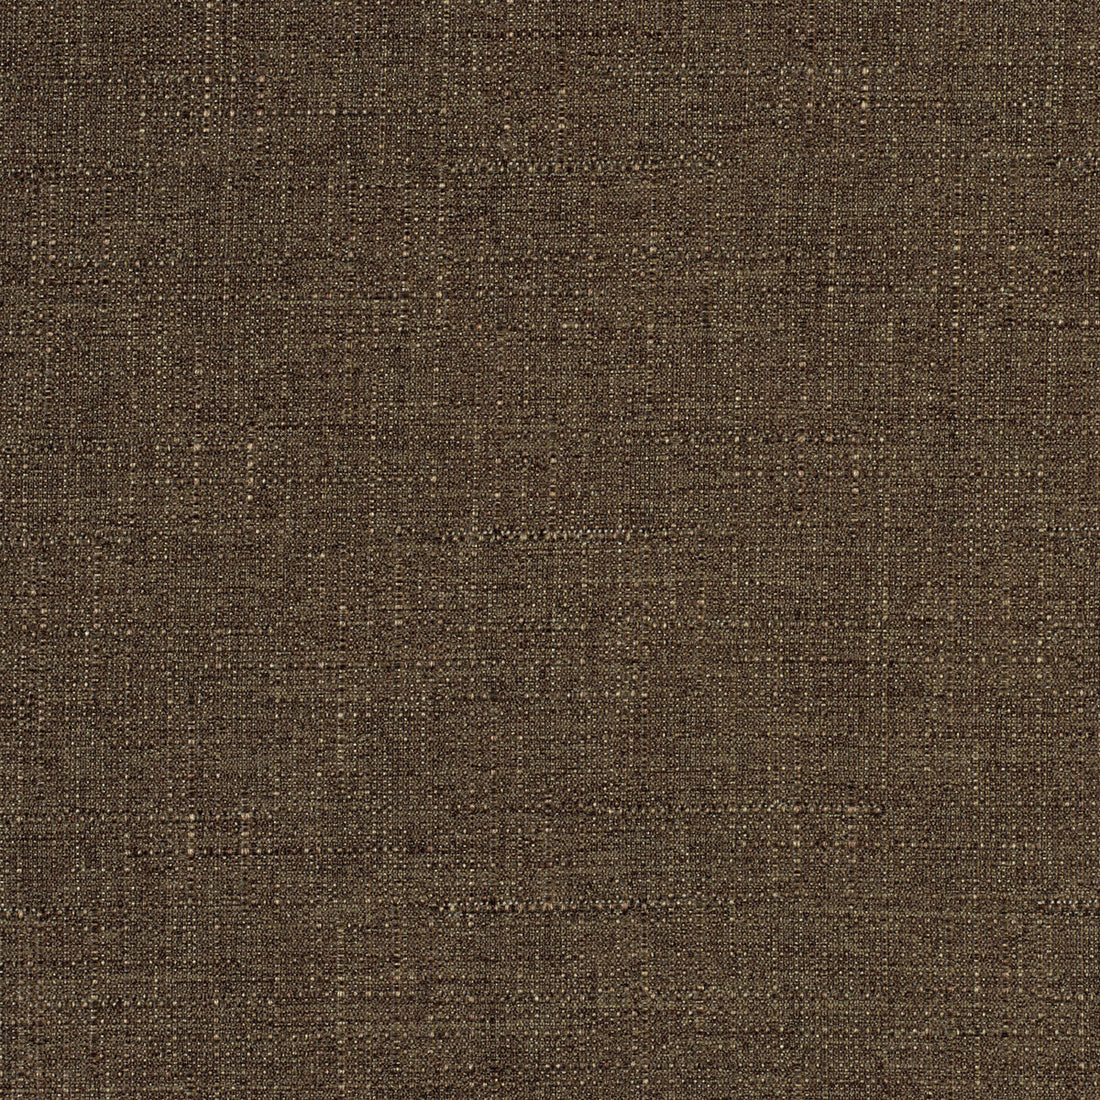 Kravet Contract fabric in 4321-66 color - pattern 4321.66.0 - by Kravet Contract